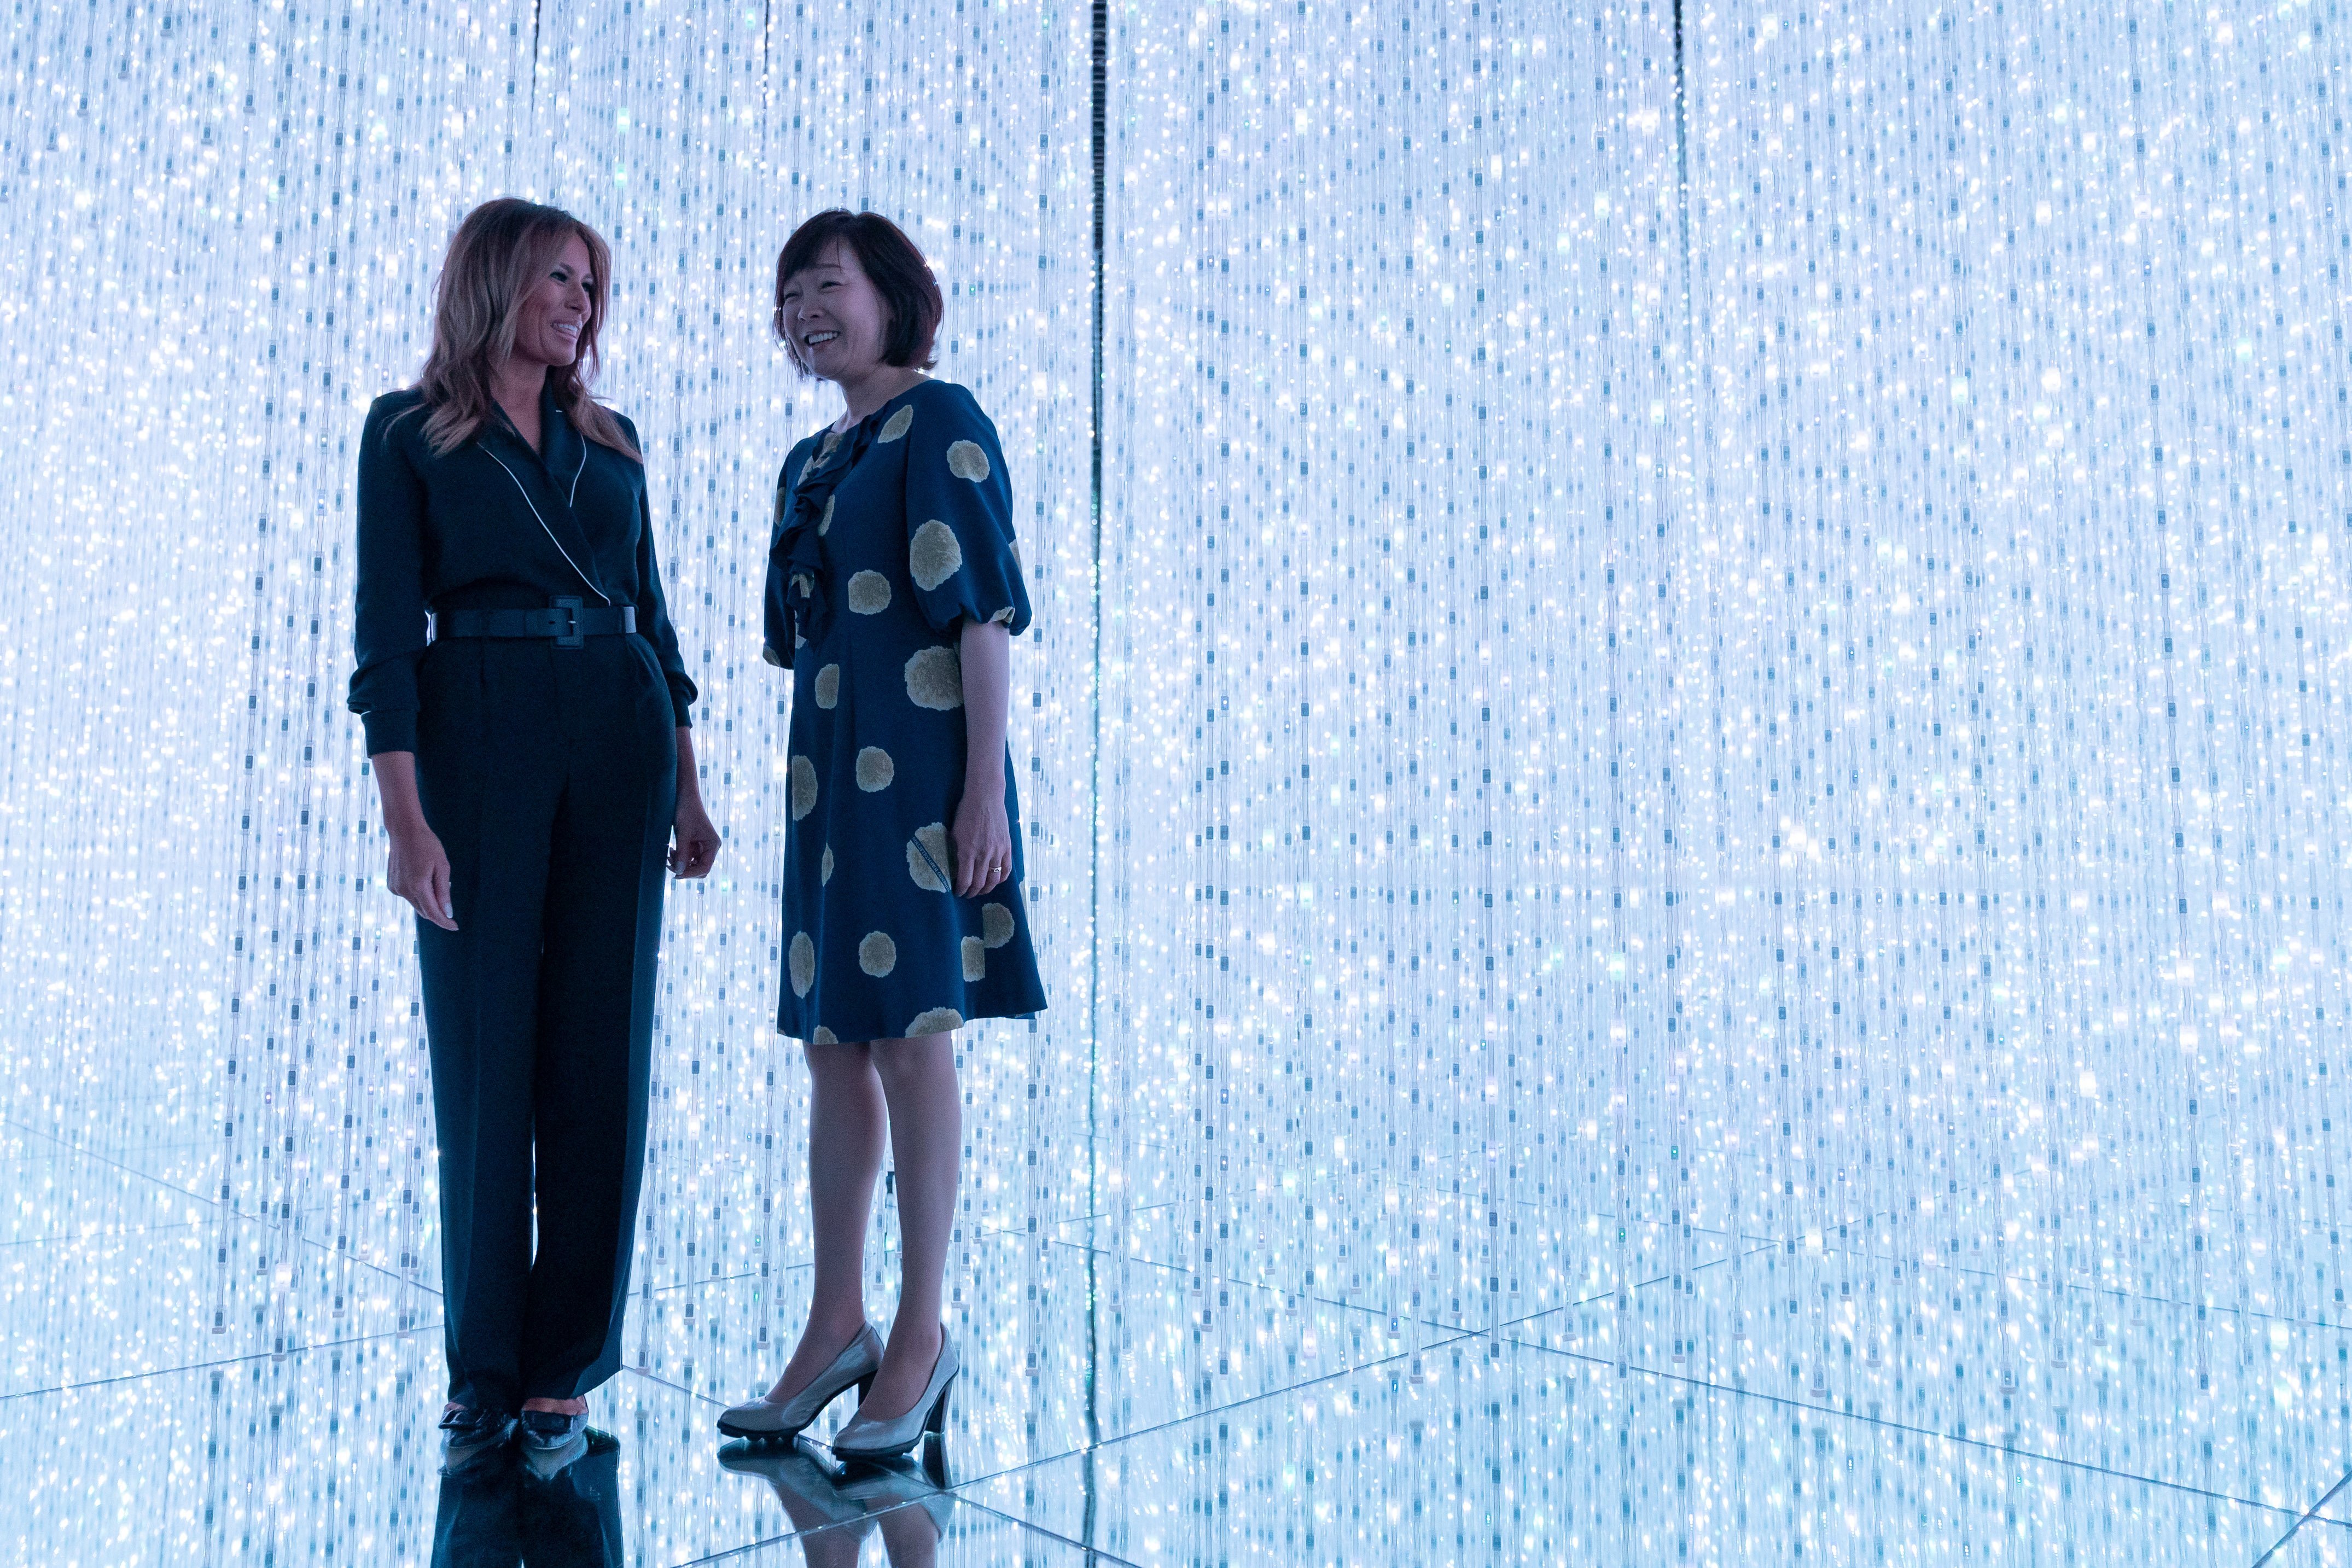 Melania Trump and Akie Abe at the Mori Building Digital Art Museum in Tokyo, Japan | Photo: Getty Images